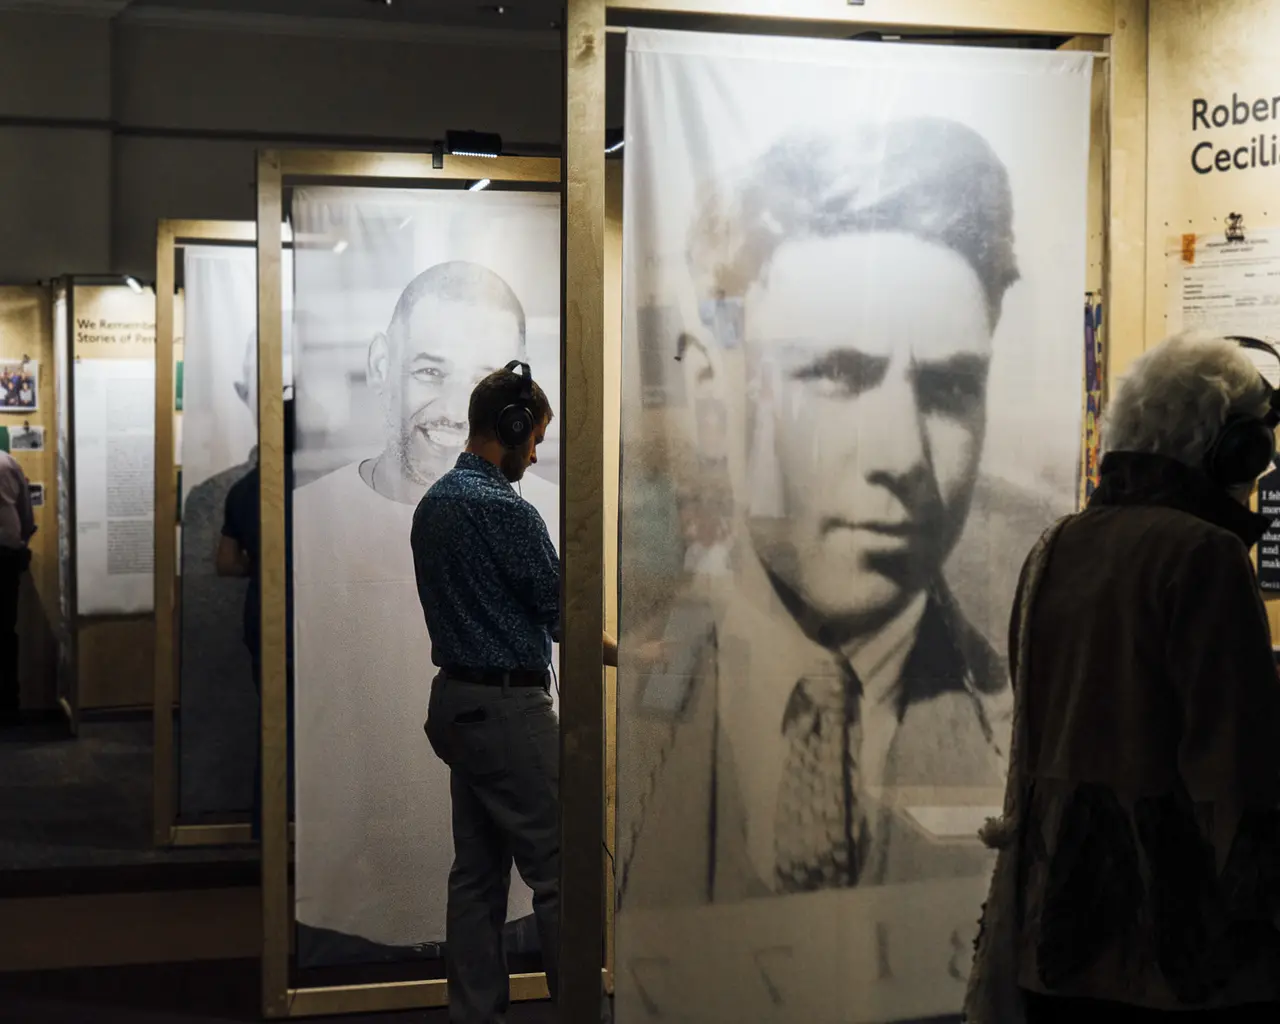 Image description: A row of large wooden display panels featuring three, larger-than-life portraits of men, tow archival and one modern. A woman stands at the first display, and a man stands at the second display. Both are wearing headphones. A third man stands at a display in the back of the room.